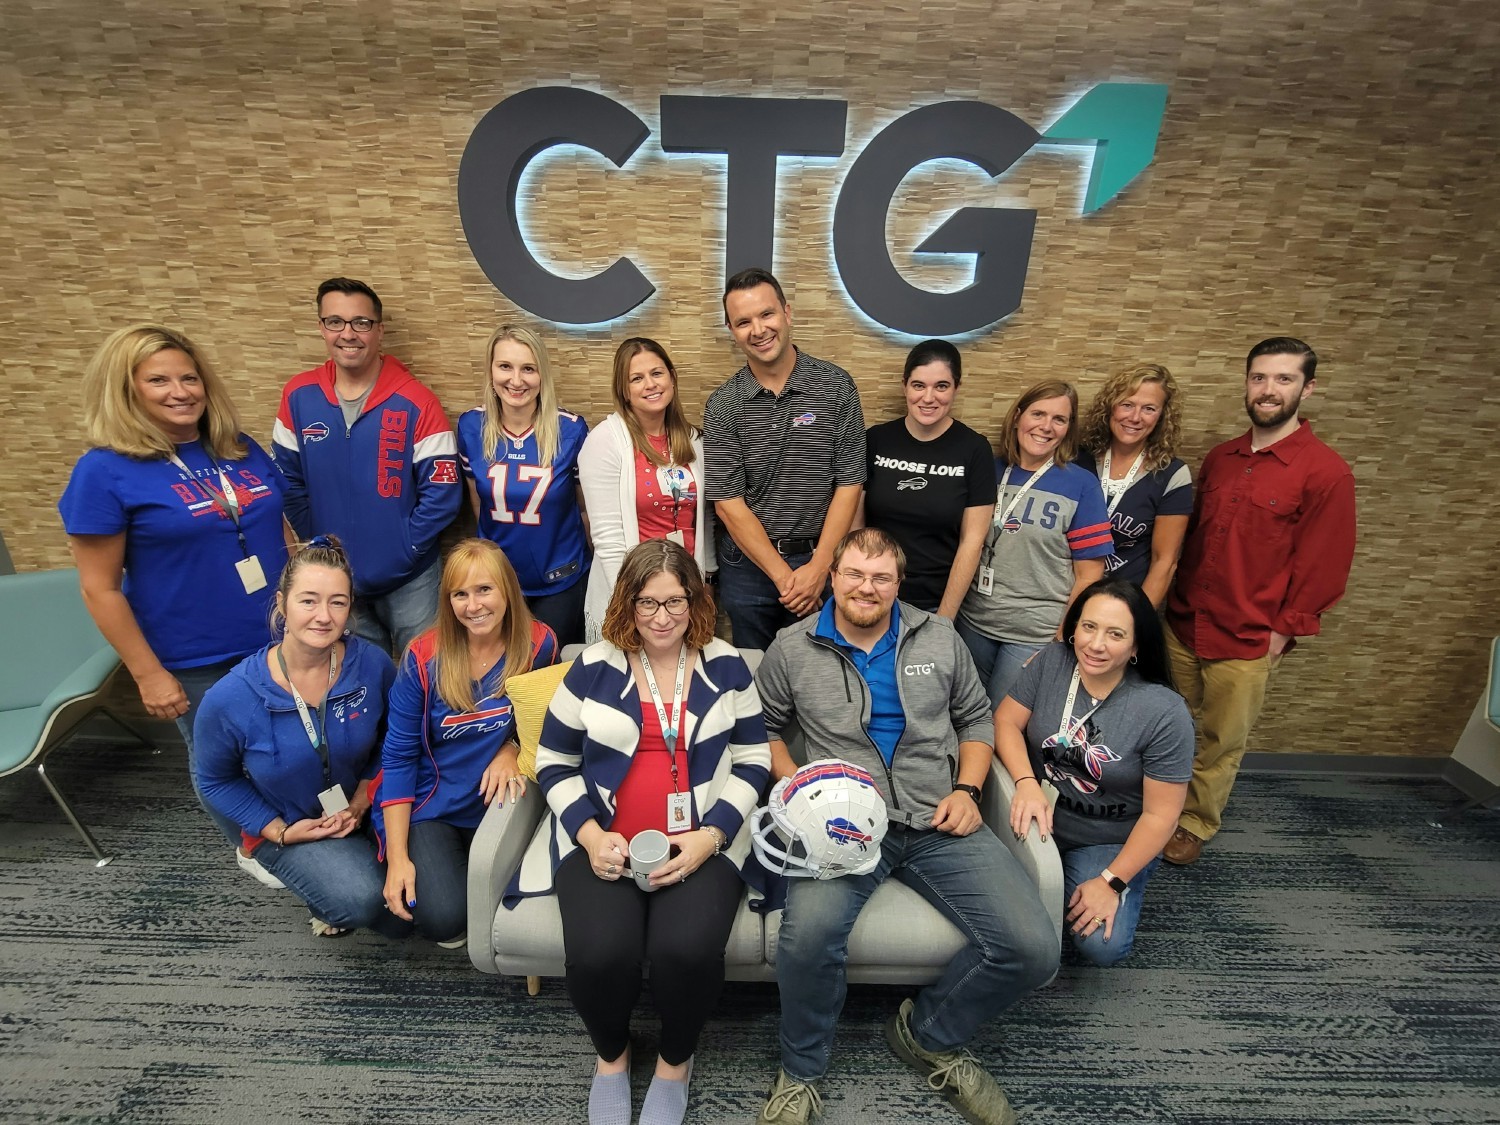 CTG's corporate headquarters is in Buffalo, NY, which means 